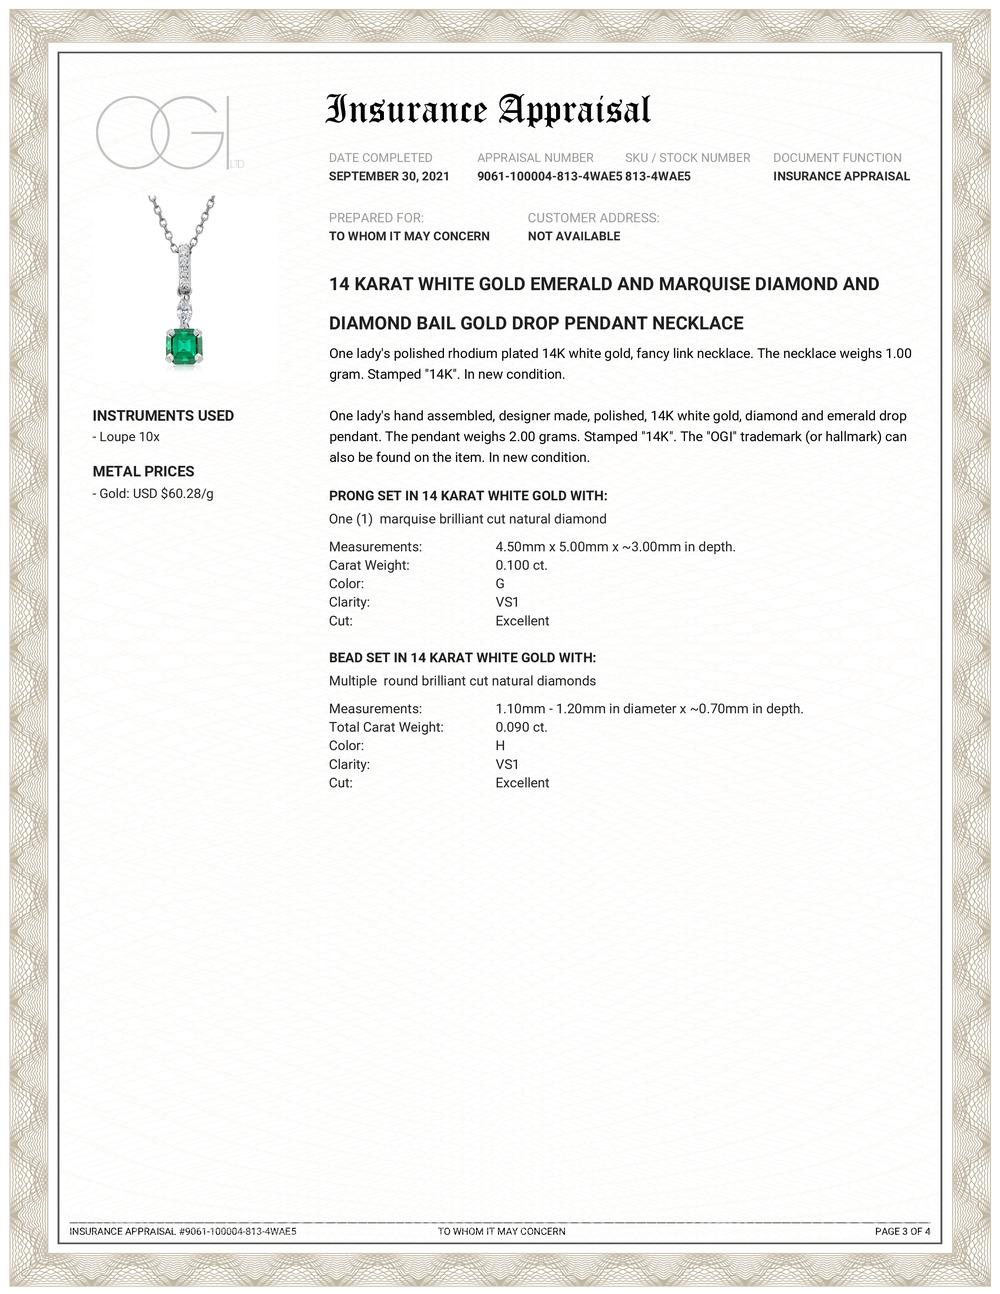 14 karats white gold necklace pendant with emerald-shaped emerald
Necklace measuring 18 inches long
Colombia emerald-cut emerald  weighing 0.90 carats
One marquise diamond weighing 0.10 carats
Diamond bail weighing 0.09 carats
Emerald color hue is